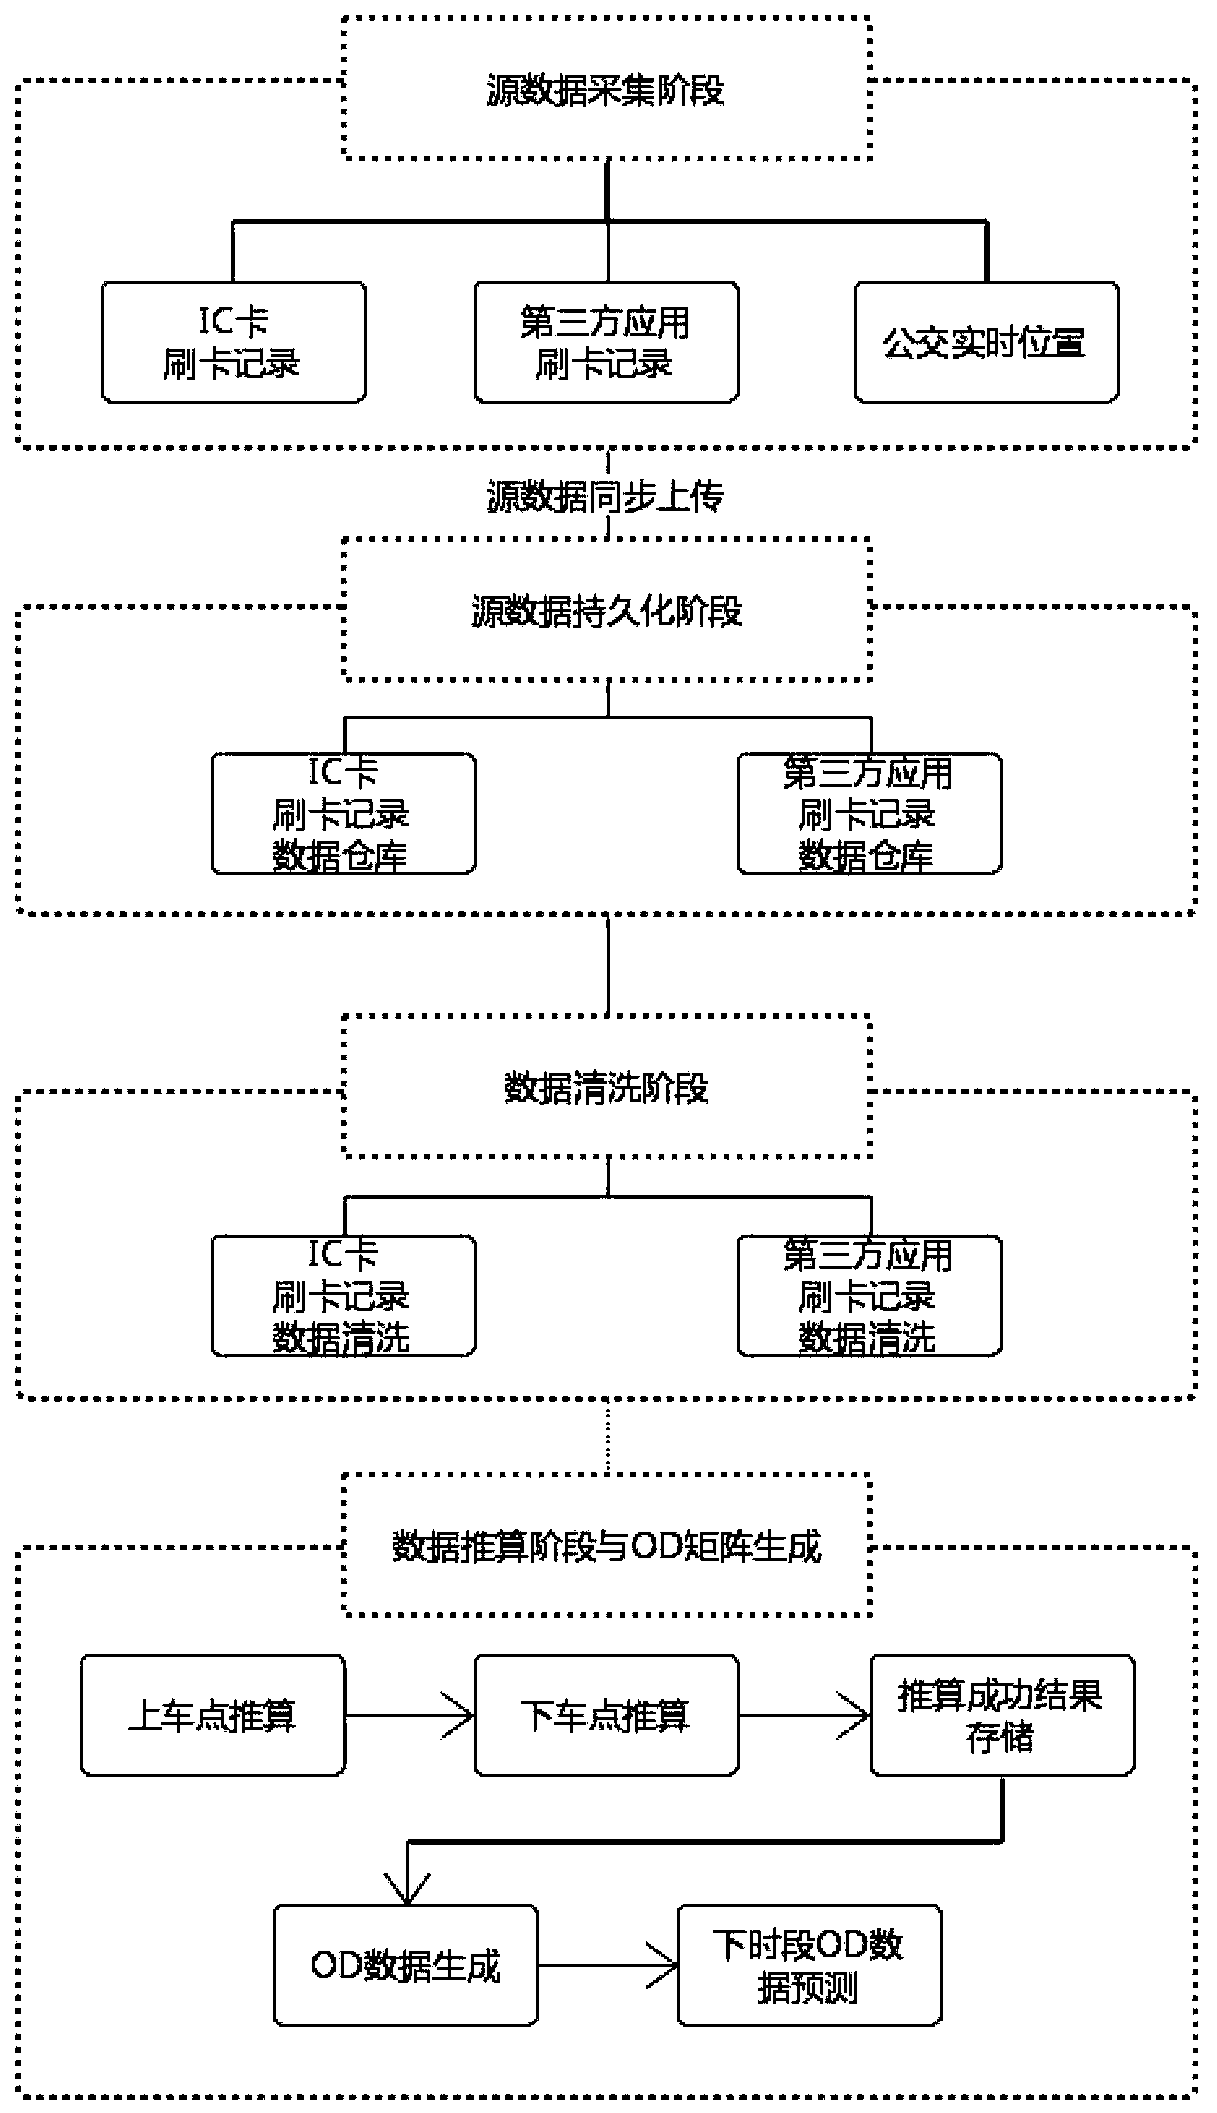 Bus network passenger flow detection method and system based on fusion data